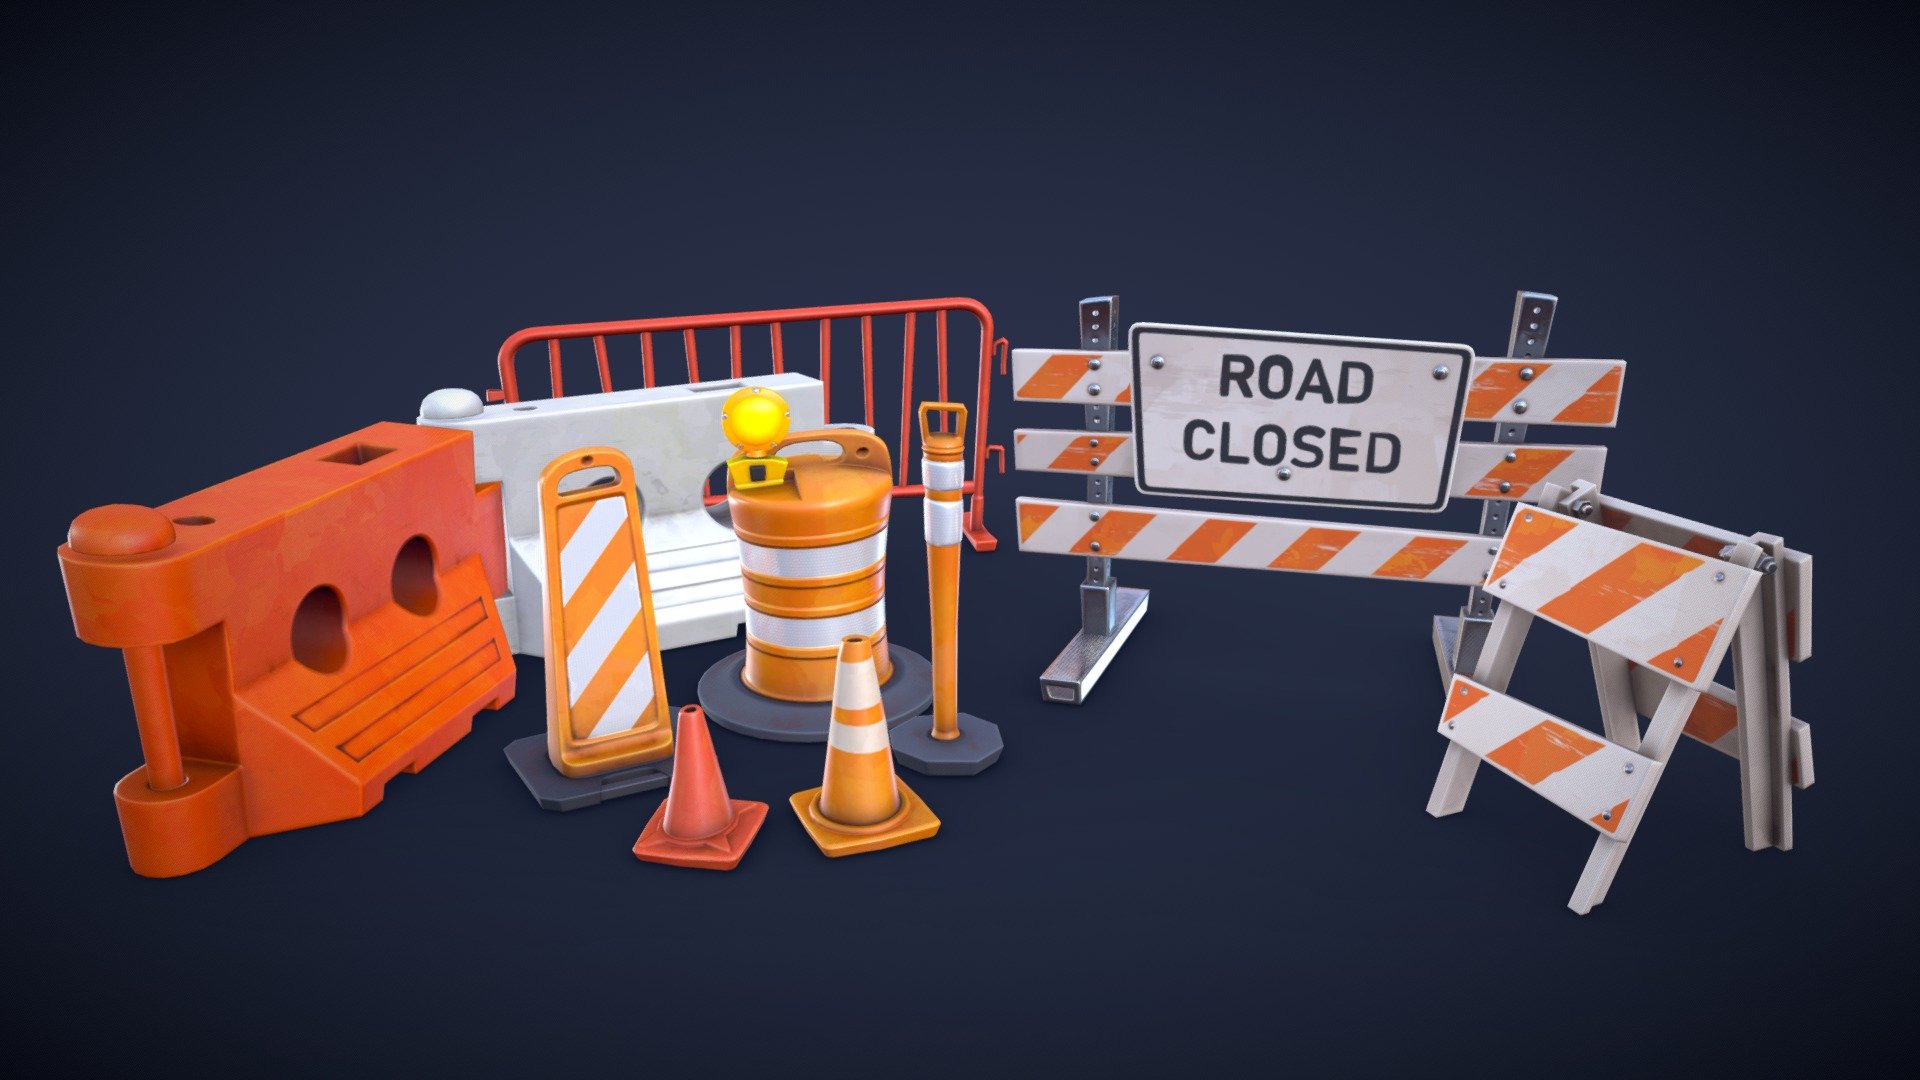 Add some variety to your urban scenes with this stylized 3D asset pack. It contains different traffic barricades, traffic cones and a delineator, inspired by the streets of New York. Whether you need to block a road, mark a construction site or create a traffic jam, this pack has you covered. 🚧

Model information:




Optimized low-poly assets for real-time usage.

2K and 4K textures for the assets are included.

Optimized and clean UV mapping.

Compatible with Unreal Engine, Unity and similar engines.

All assets are included in a separate file as well.

Here is a look at the assets included in this pack:
 - Stylized Traffic Props and Barricades - Low Poly - Buy Royalty Free 3D model by Lars Korden (@Lark.Art) 3d model